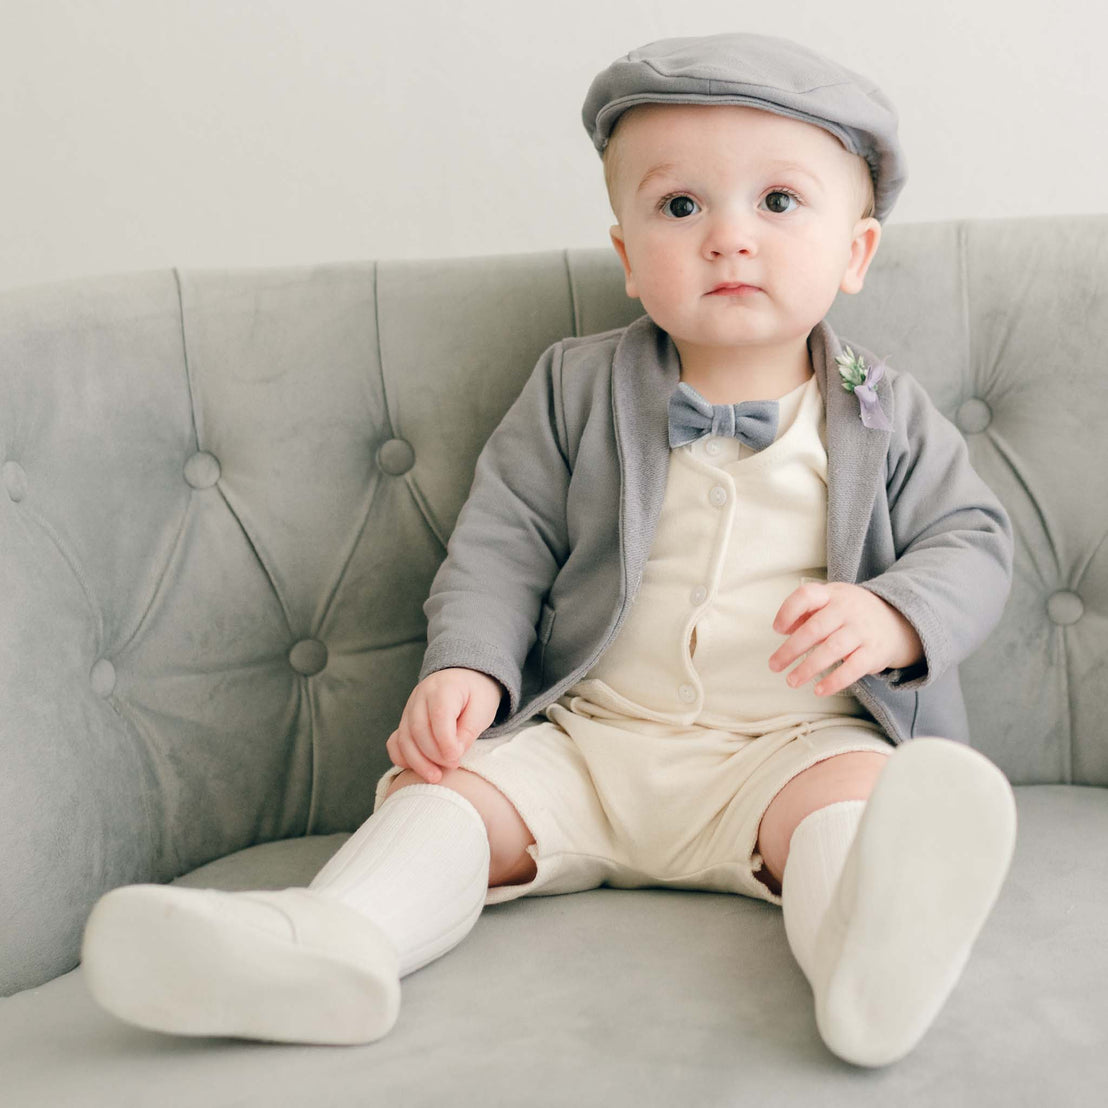 Baby boy sitting on a couch wearing the Ezra 4-Piece Suit with matching Newsboy Cap, heather velvet bow tie and boutonniere